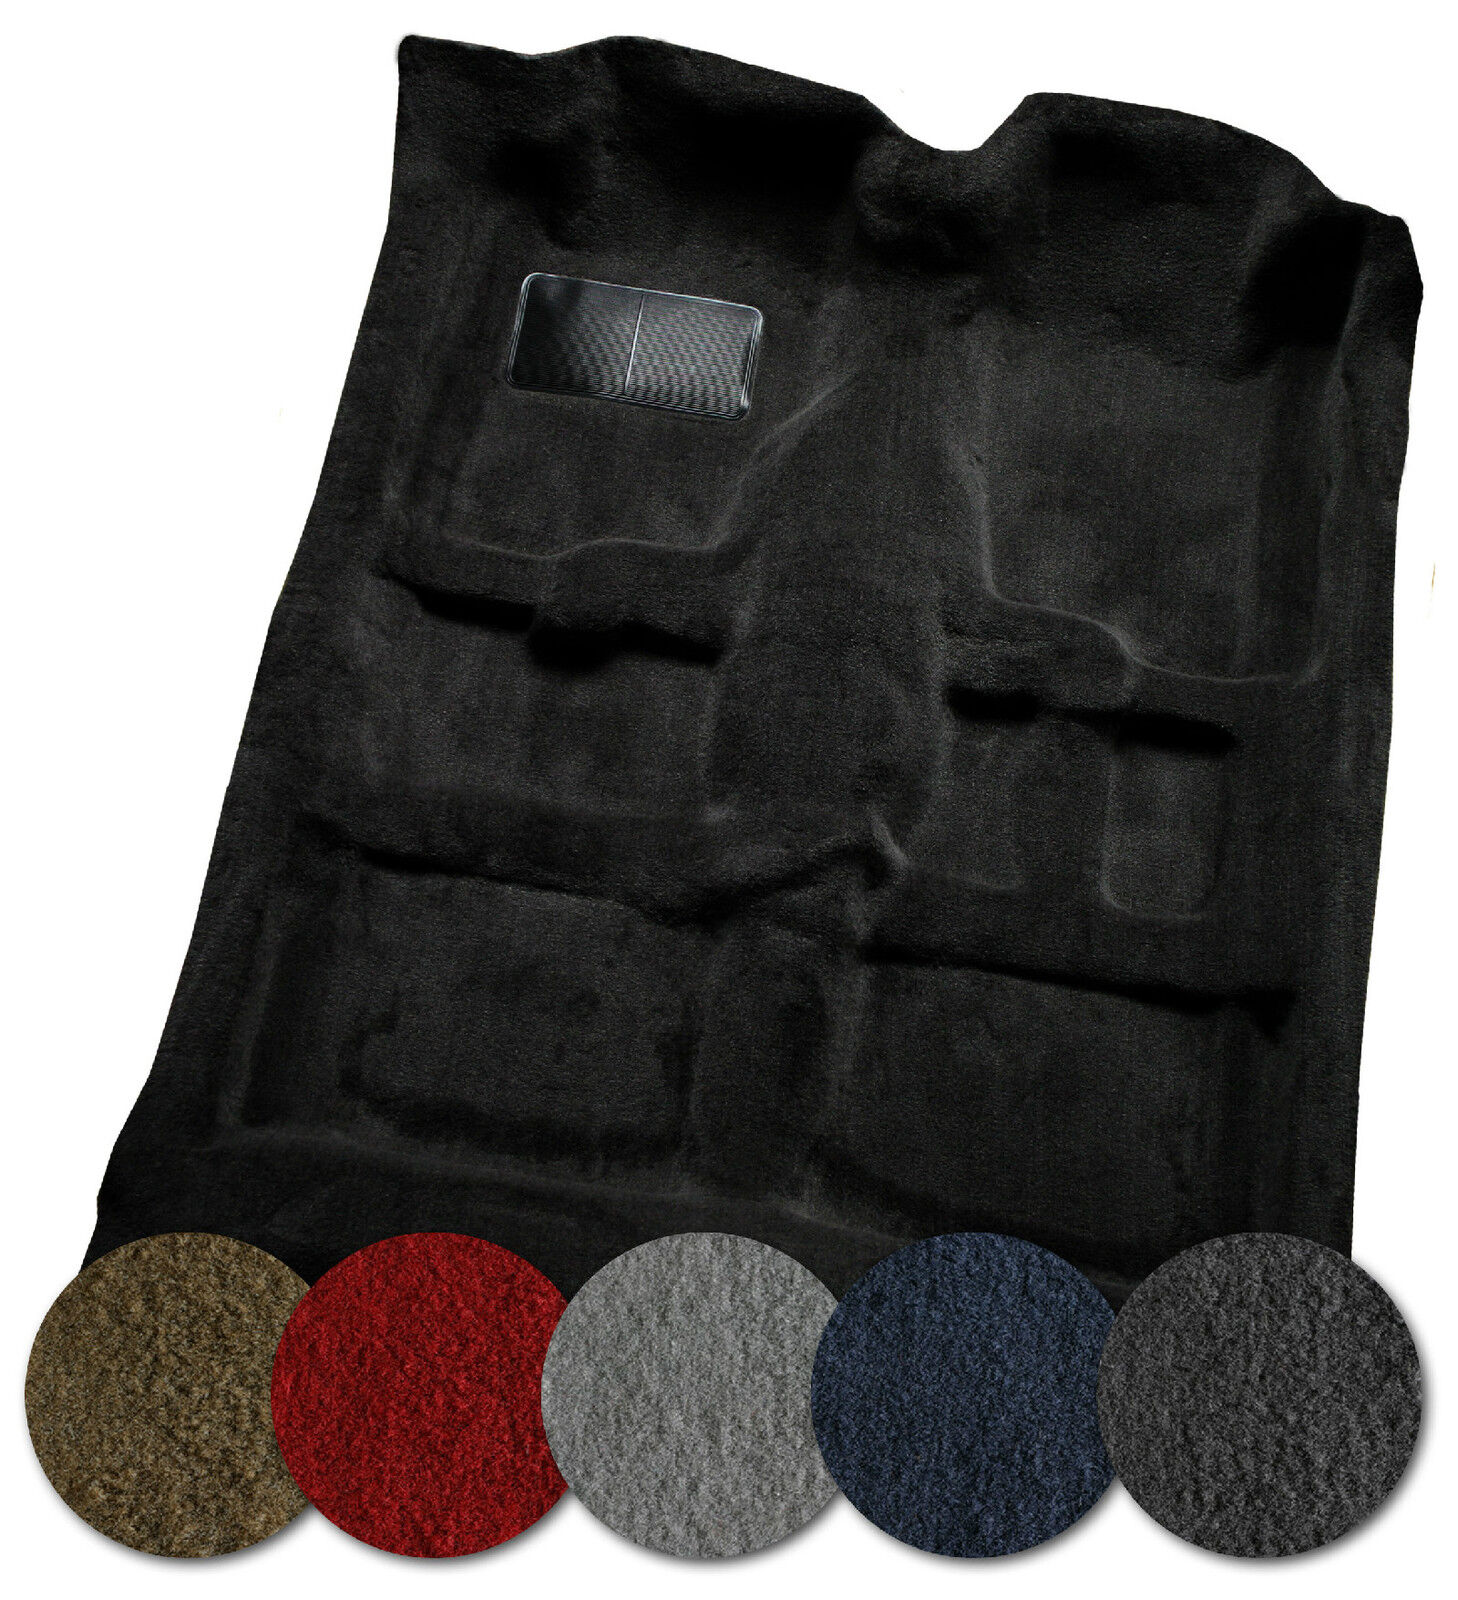 1991-1996 CHEVROLET CAPRICE 4DR CARPET - ANY COLOR